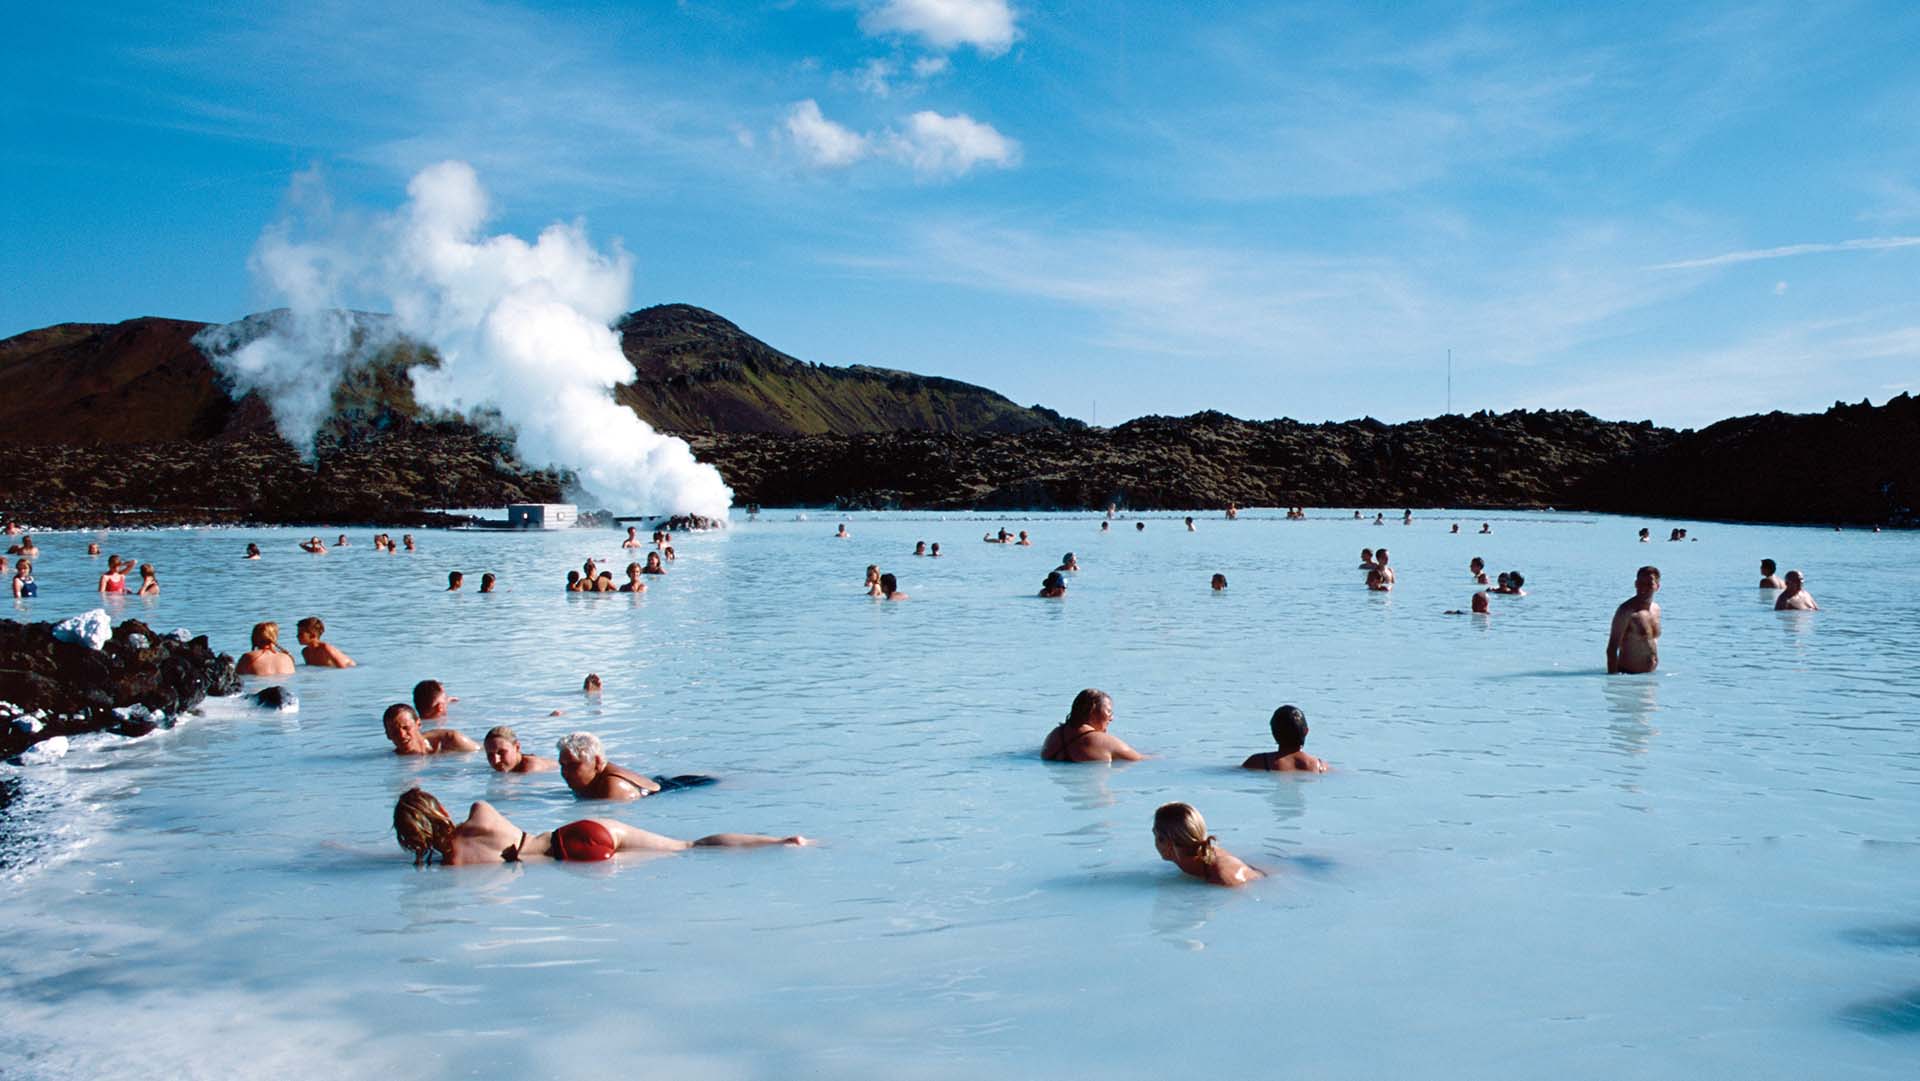 Reykjavik, Iceland - November 11, 2011: People bathing in The Blue Lagoon, a natural hot spring in the south of Iceland. Outdoors, with clear sky.